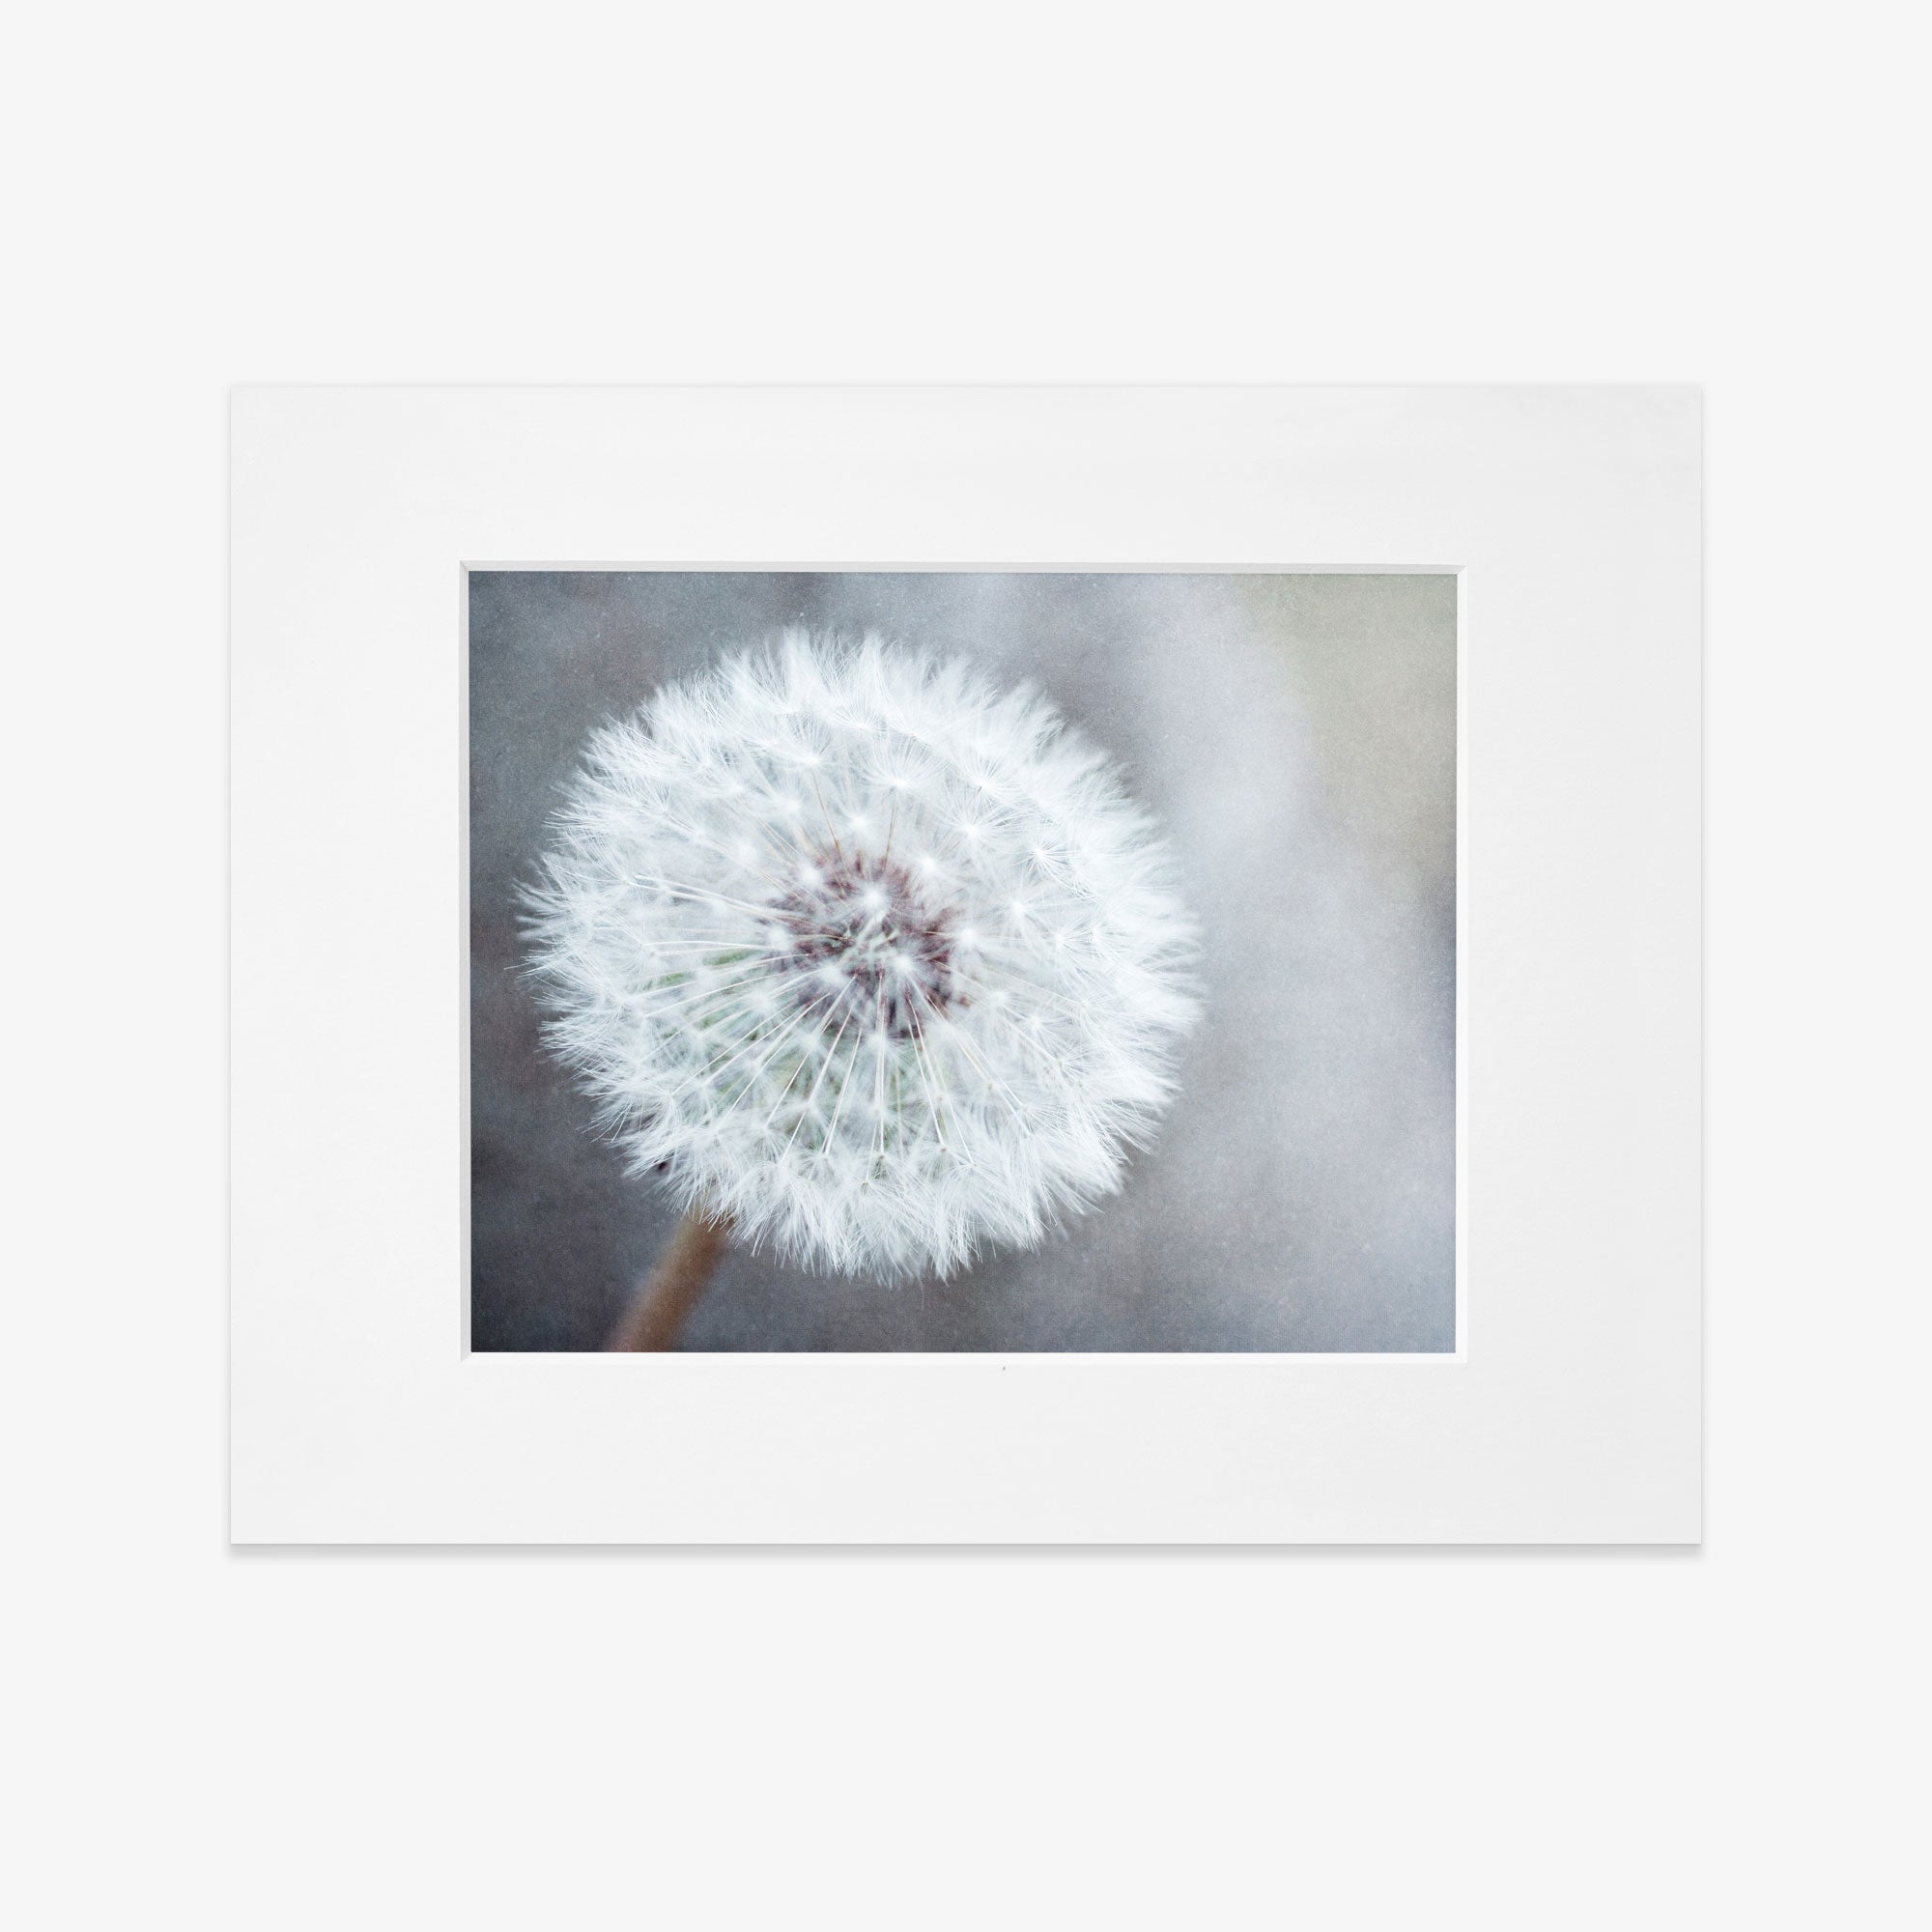 A close-up photo of a &#39;Neutral Grey Floral Print, &#39;Dandelion King&#39;&#39;, printed on archival photographic paper with a non-glossy lustre finish, displayed against a soft, blurred background by Offley Green.